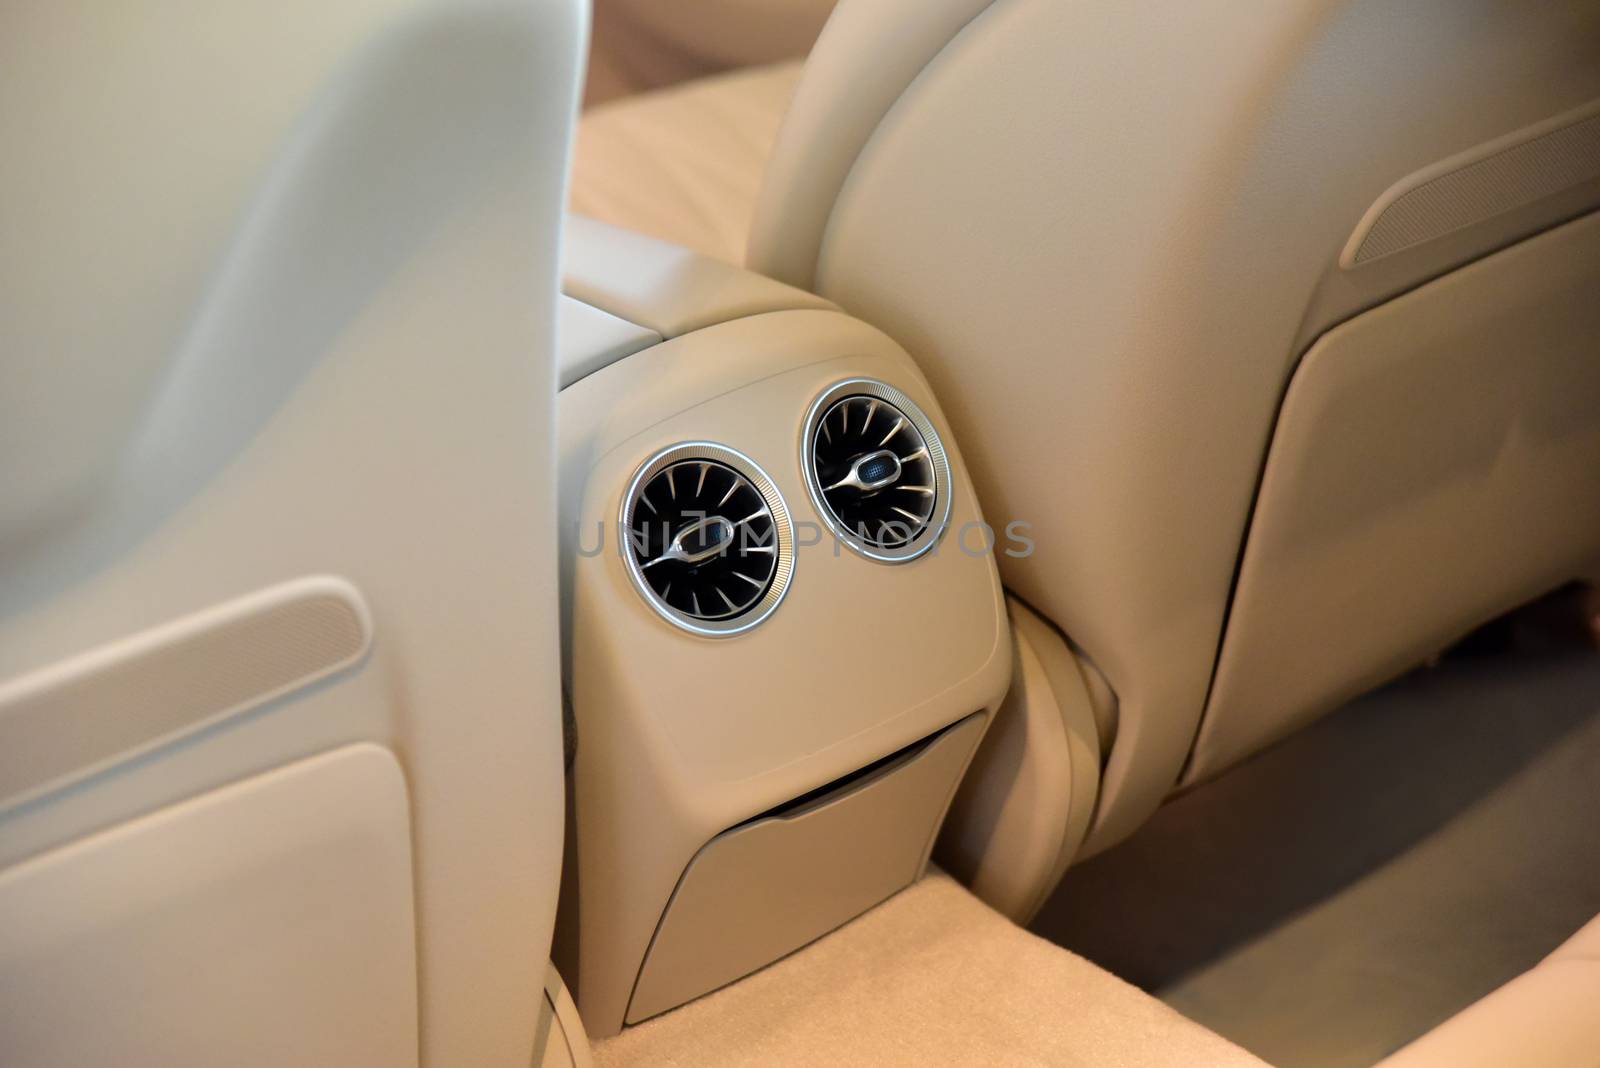 control of air conditioning and ventilation for rear passengers